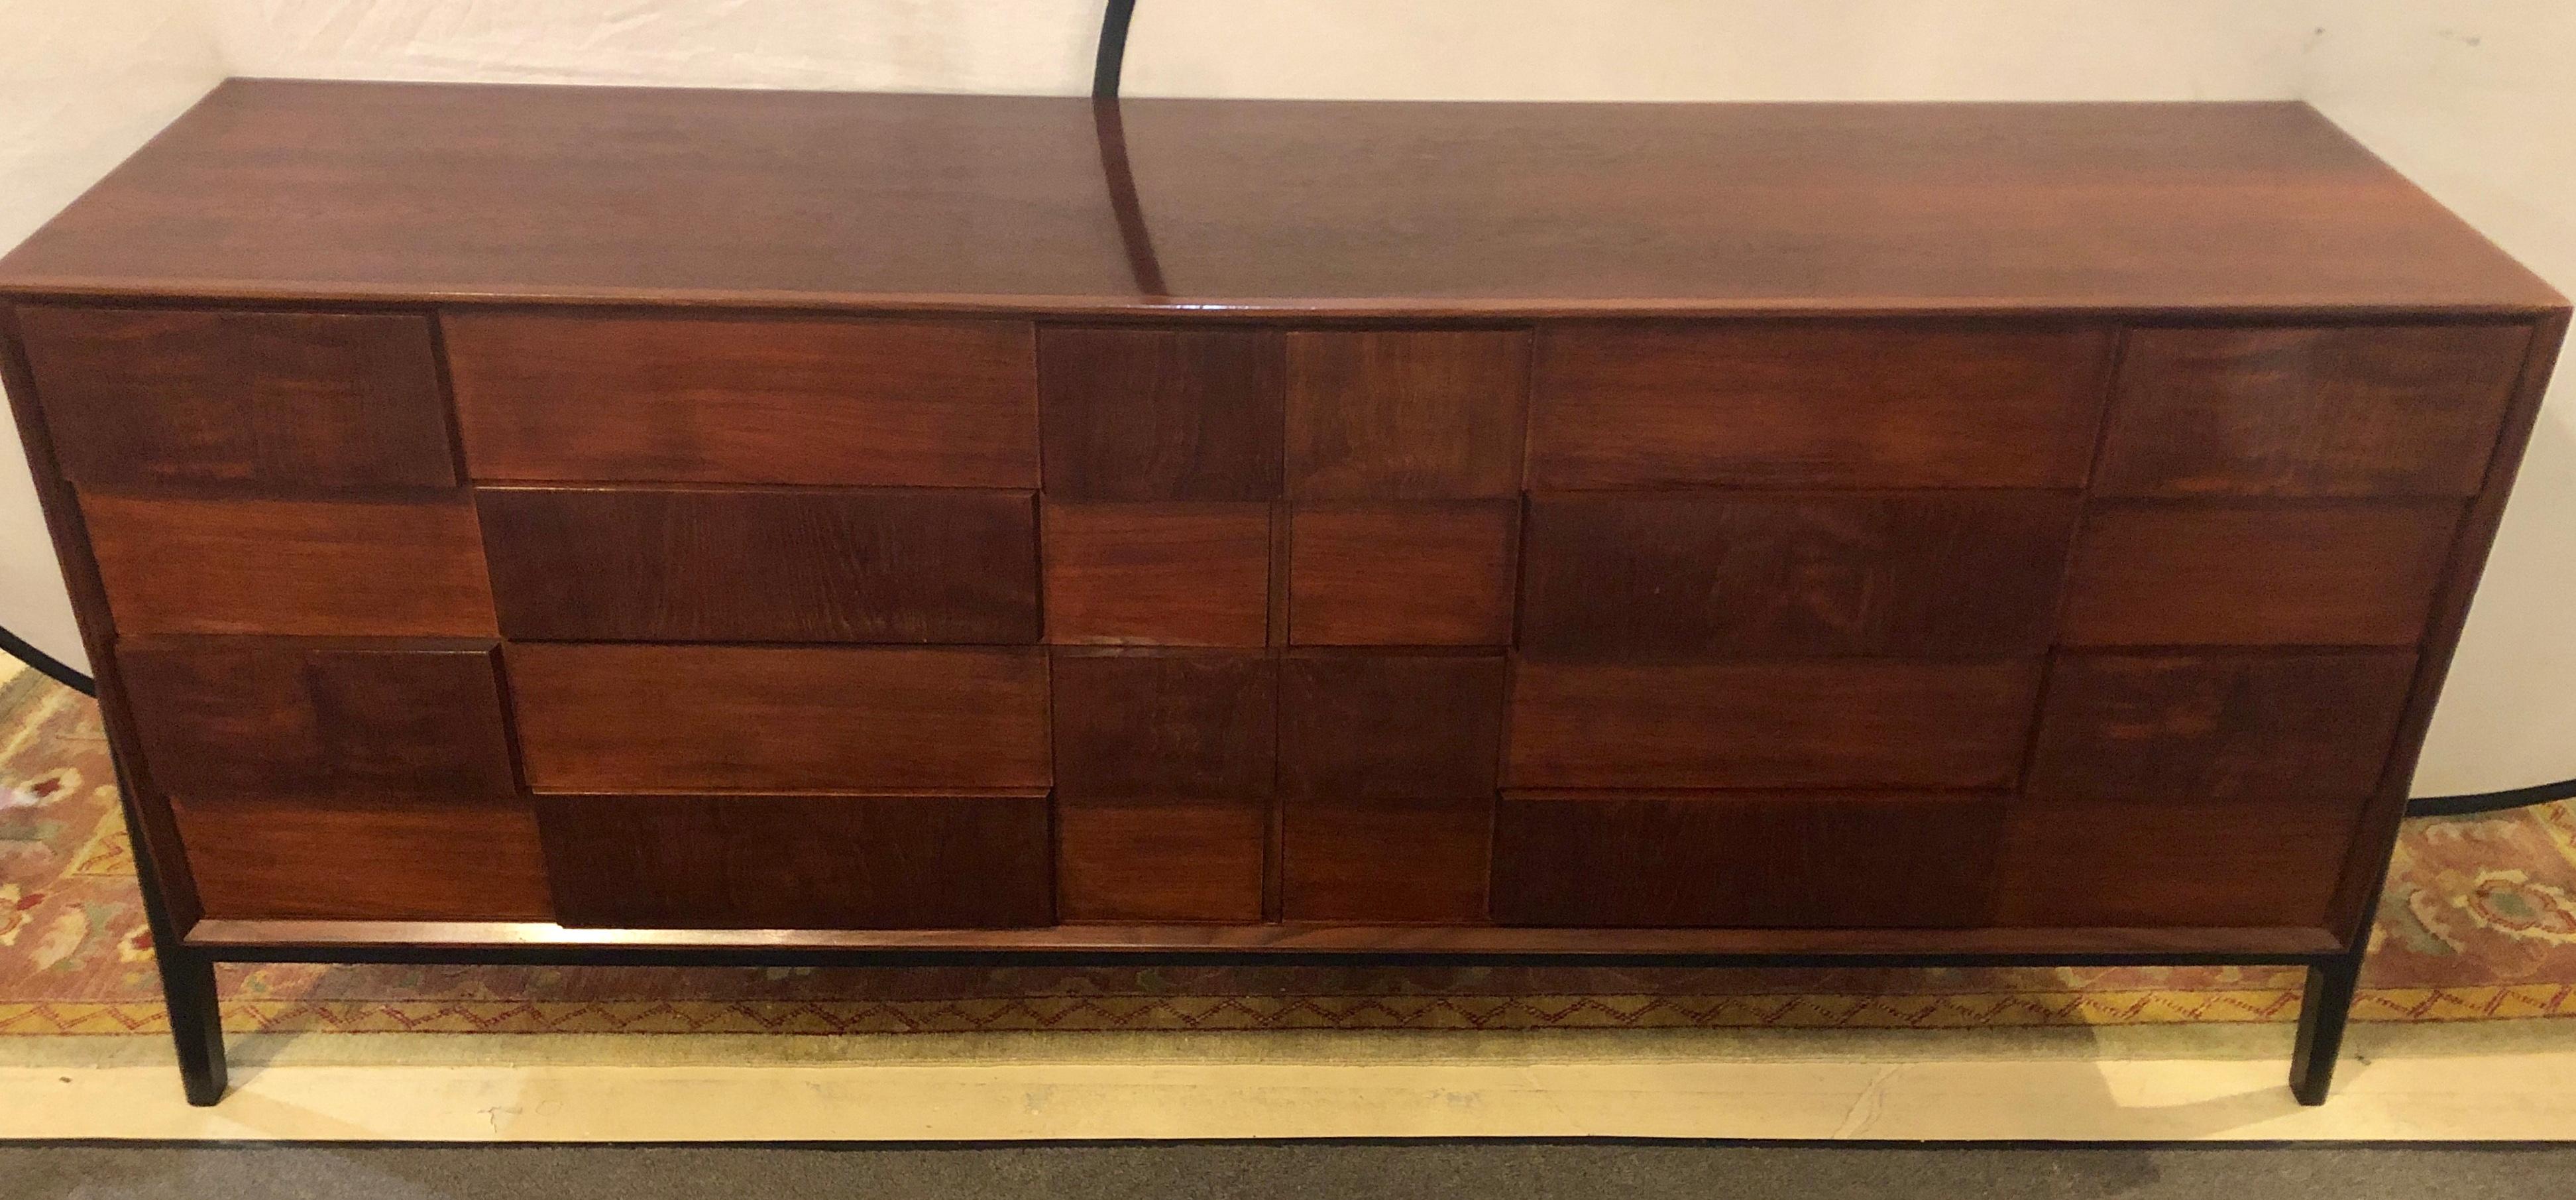 A Large and Impressive Mid-Century Modern Edmund Spence fashion double dresser in walnut and ebony. This recently refinished dresser has an ebony decorated undercarriage and four ebony legs supporting the four by four group of drawers made of check